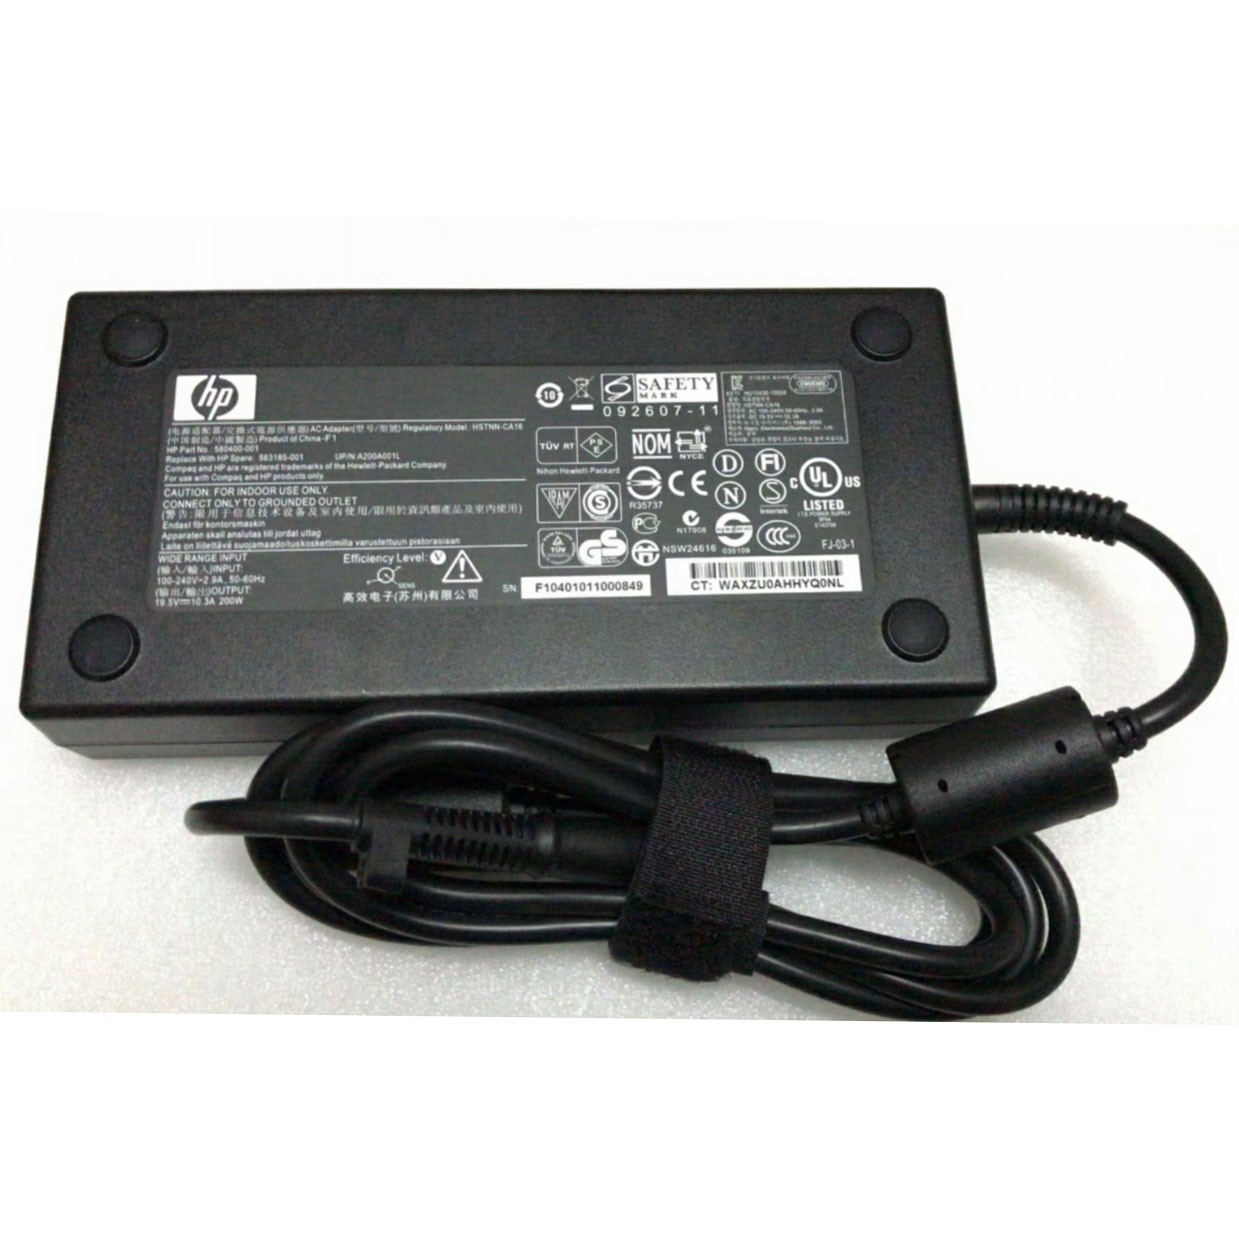 Genuine 200W HP 677764-003 AC Adapter Charger + Free Cord Laptop Power Supply Adapter Cord